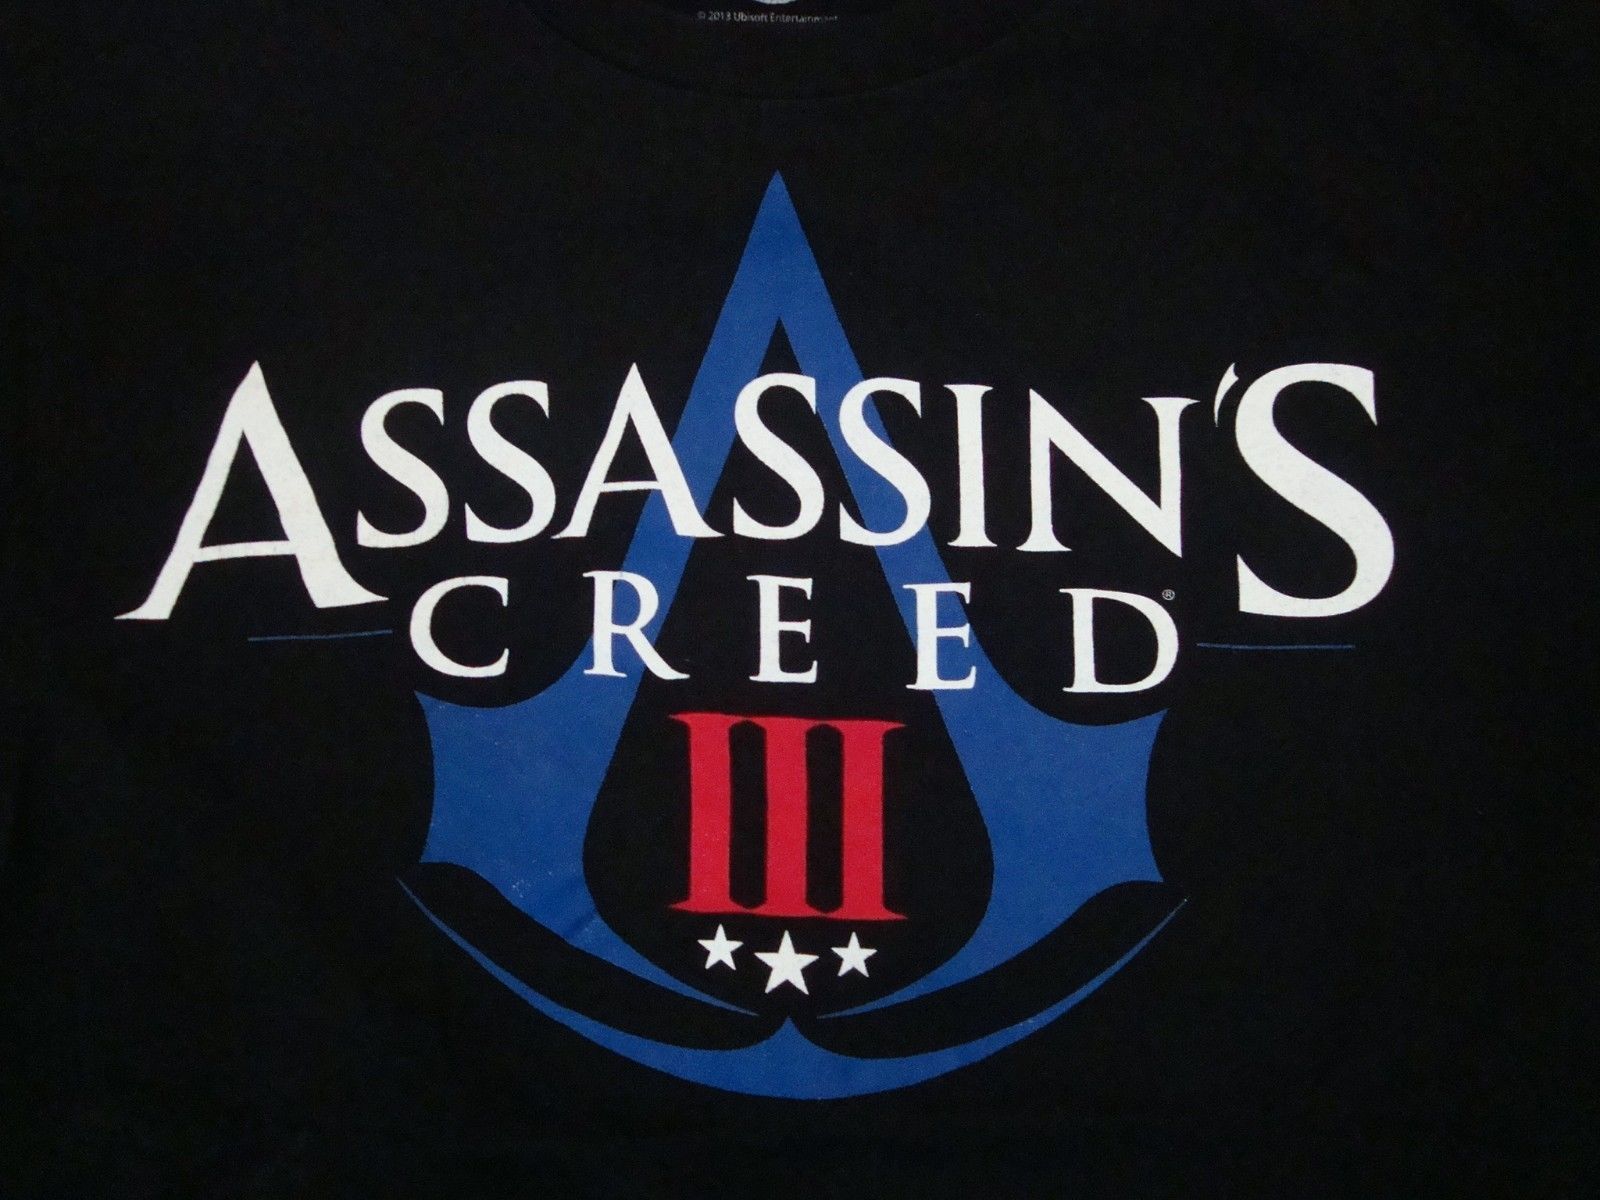 Assassin's Creed III 3 Ubisoft Montreal Video Game Release Black T Shirt M - $18.40